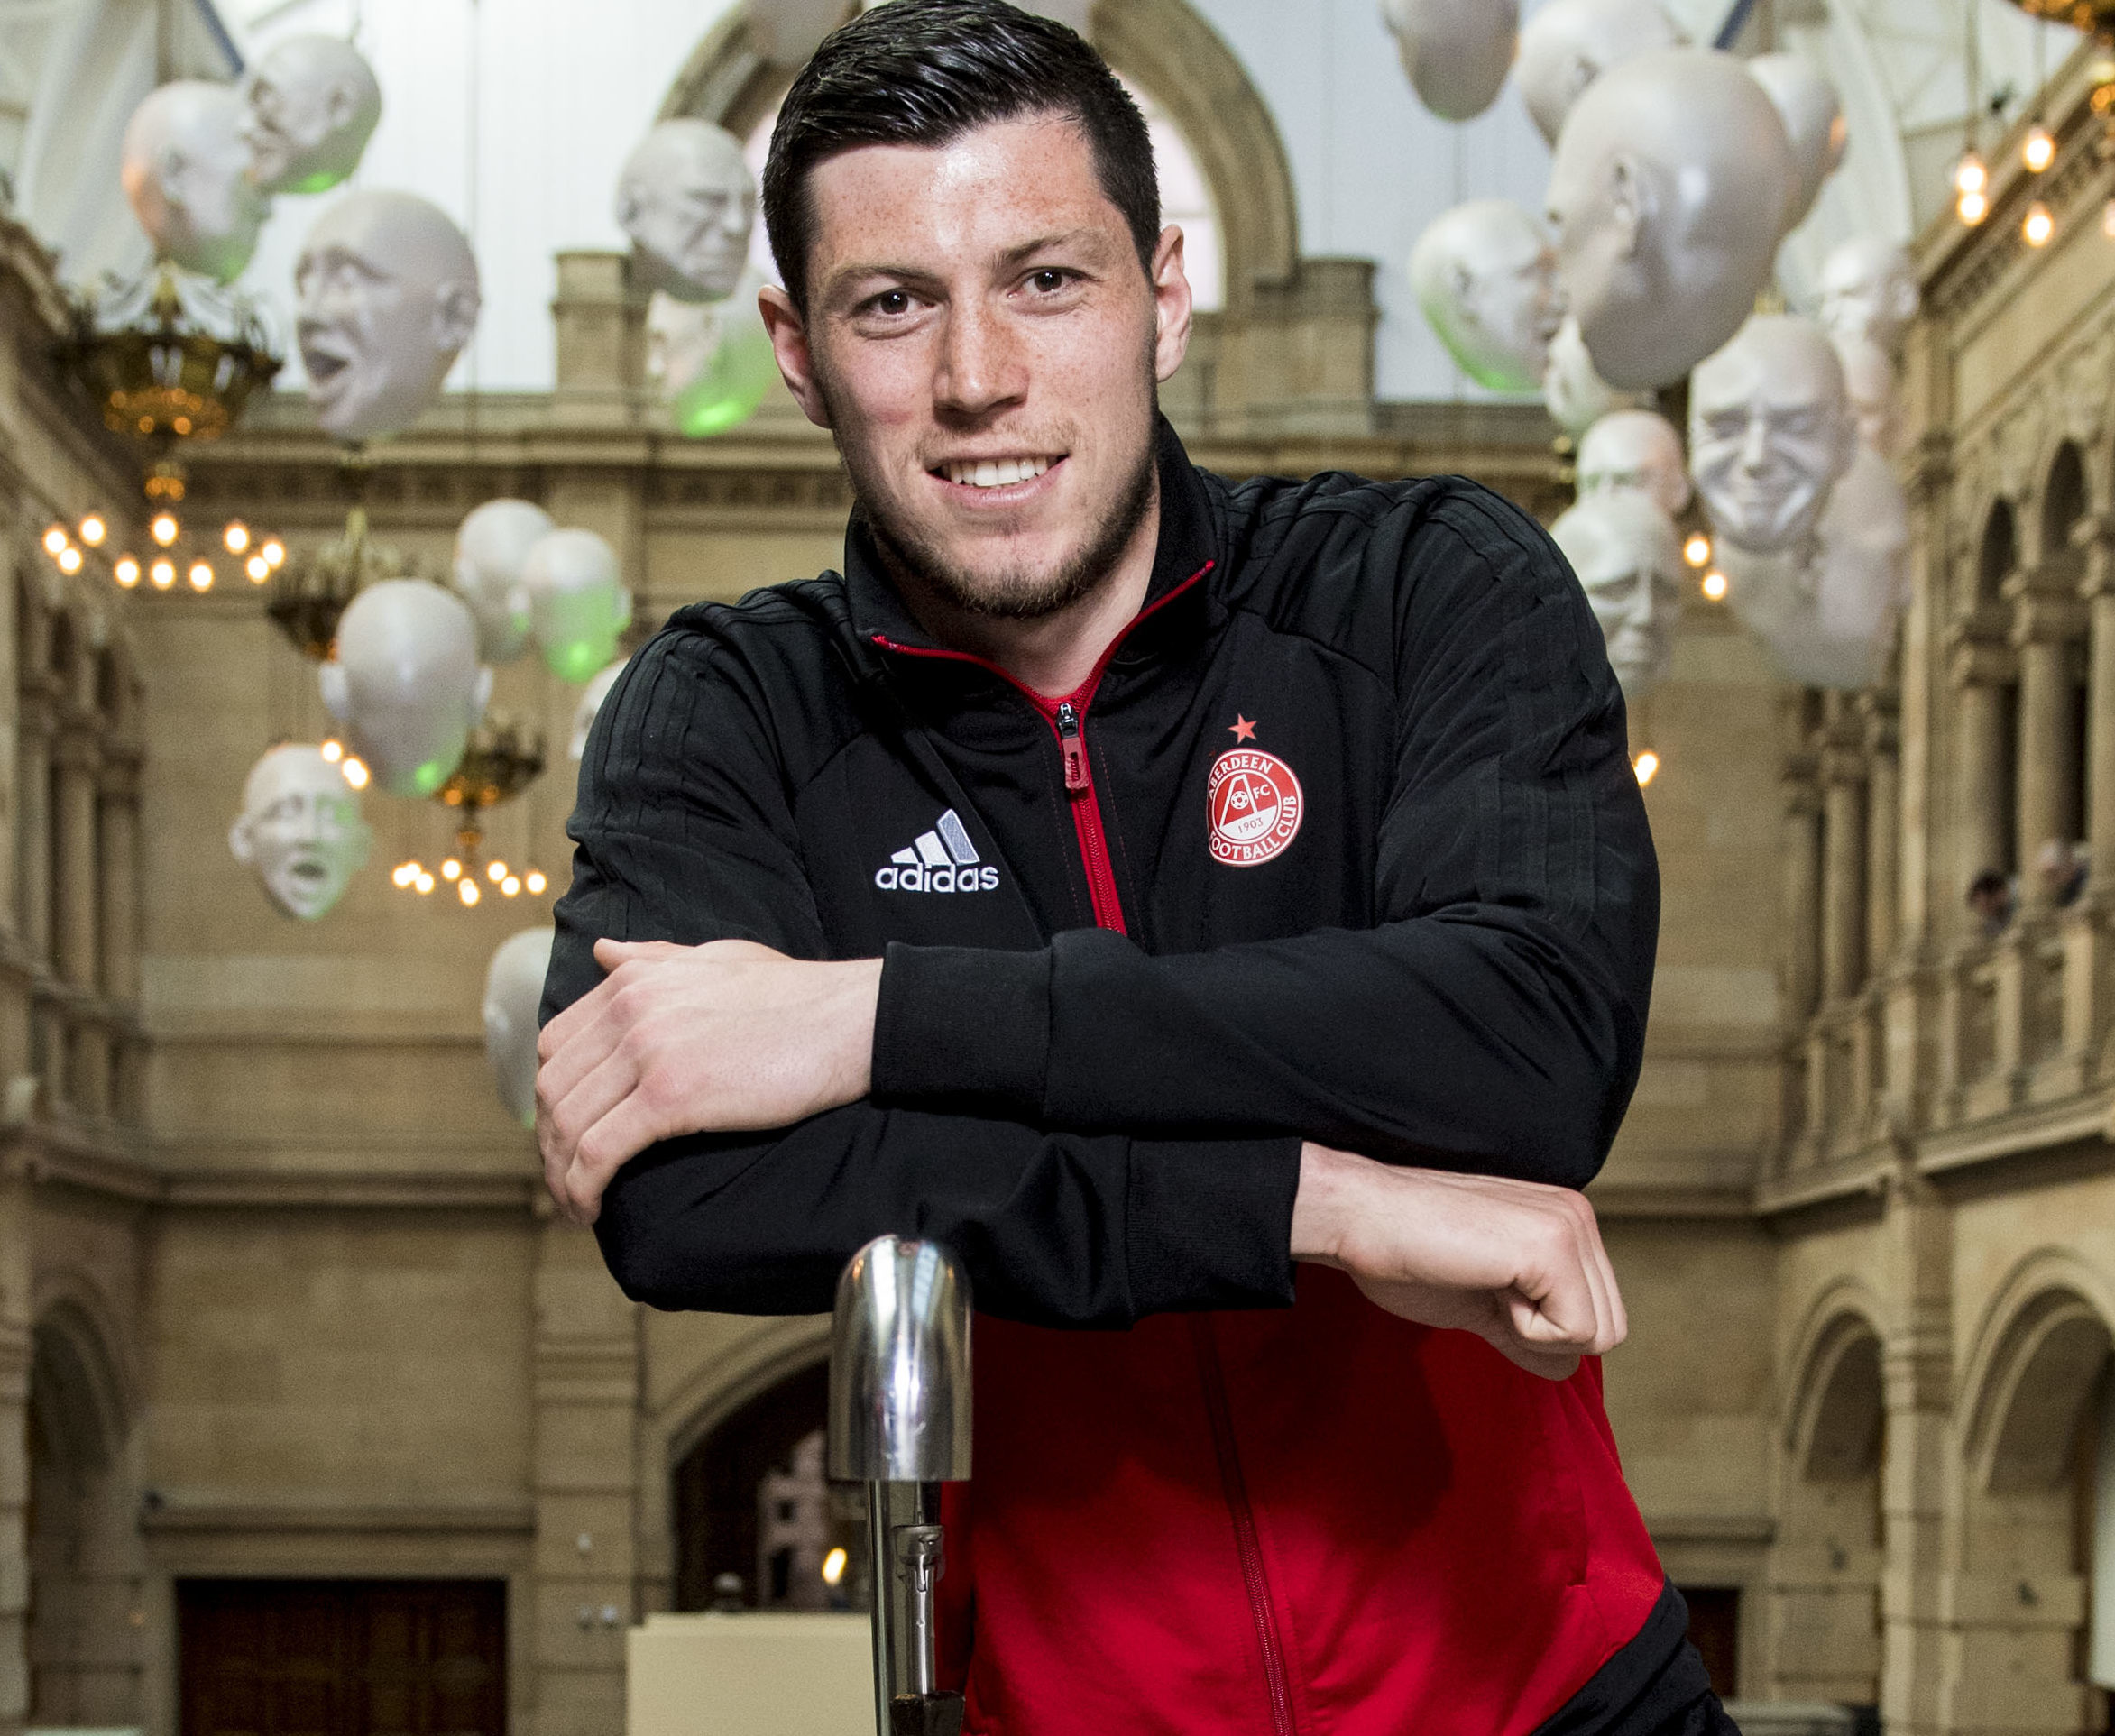 PFA Scotland has announced Aberdeen Defender Scott McKenna as a nominee for the 2017/2018 Young Player of the Year Award.